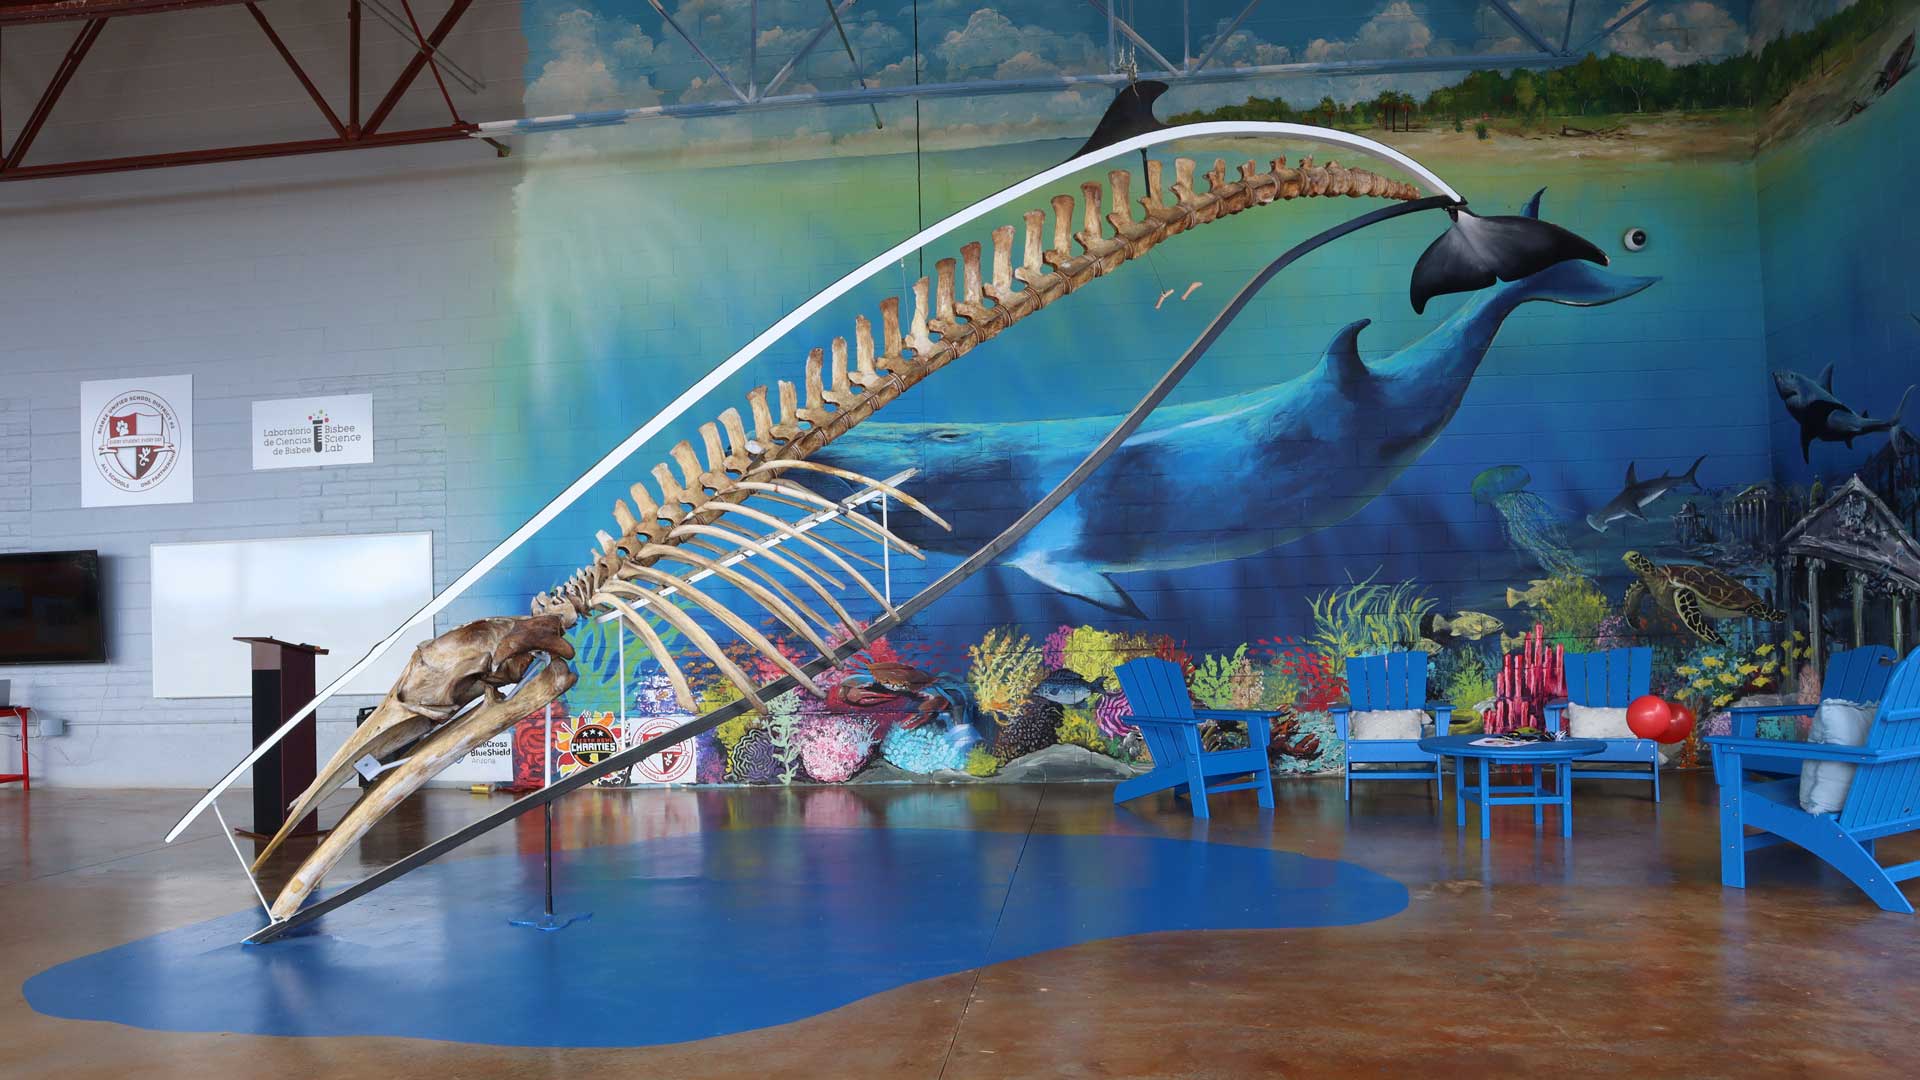 A Minke whale skeleton and mural at the Bisbee Science Center.